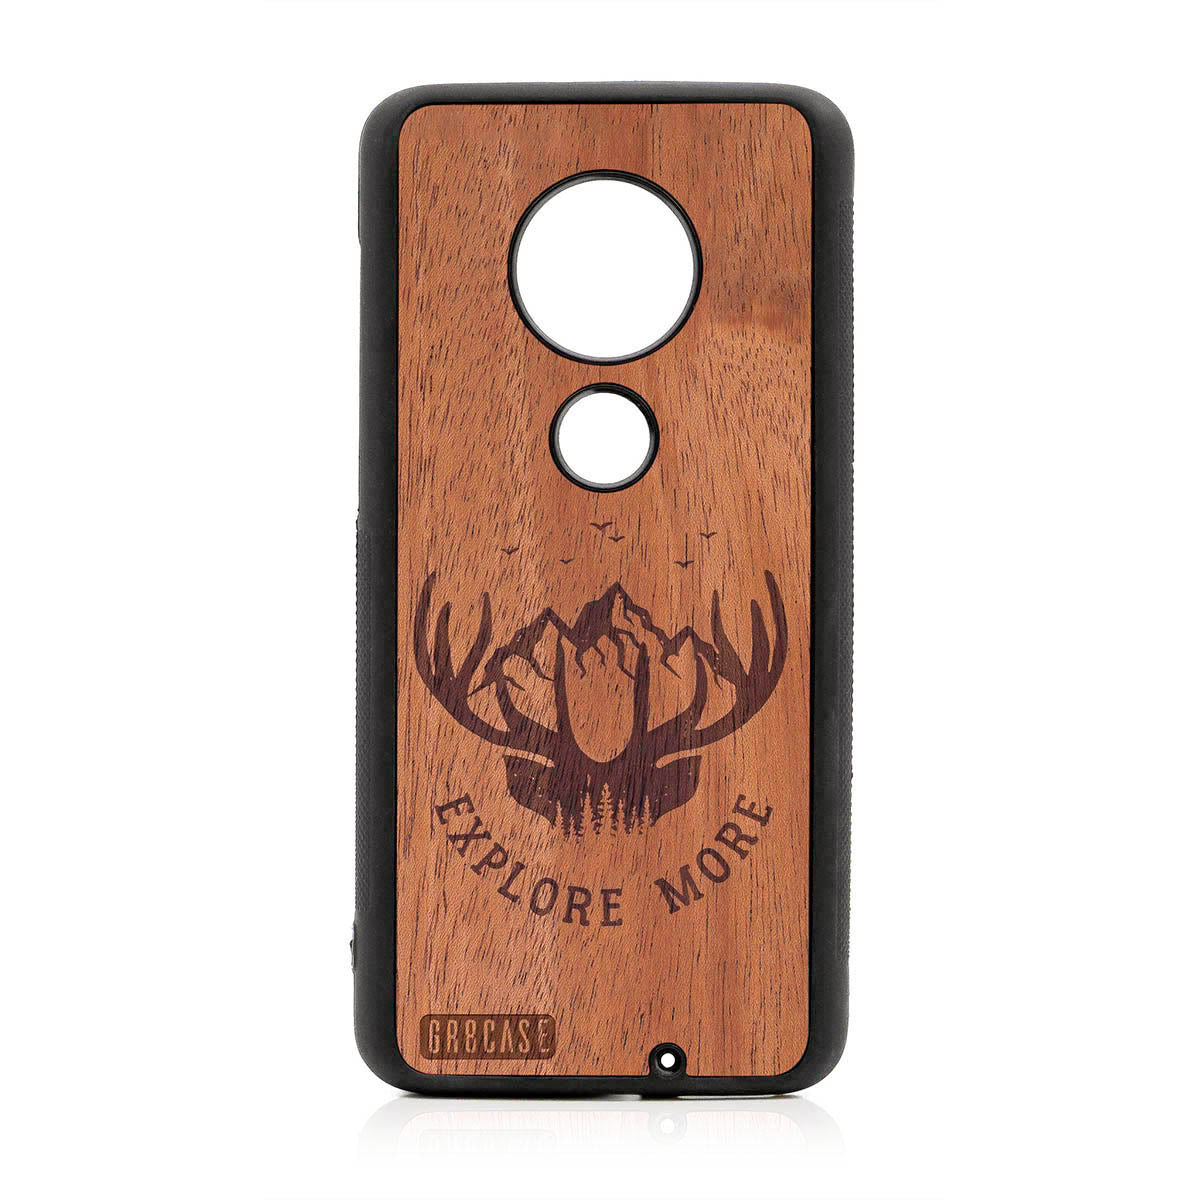 Explore More (Forest, Mountains & Antlers) Design Wood Case For Moto G7 Plus by GR8CASE